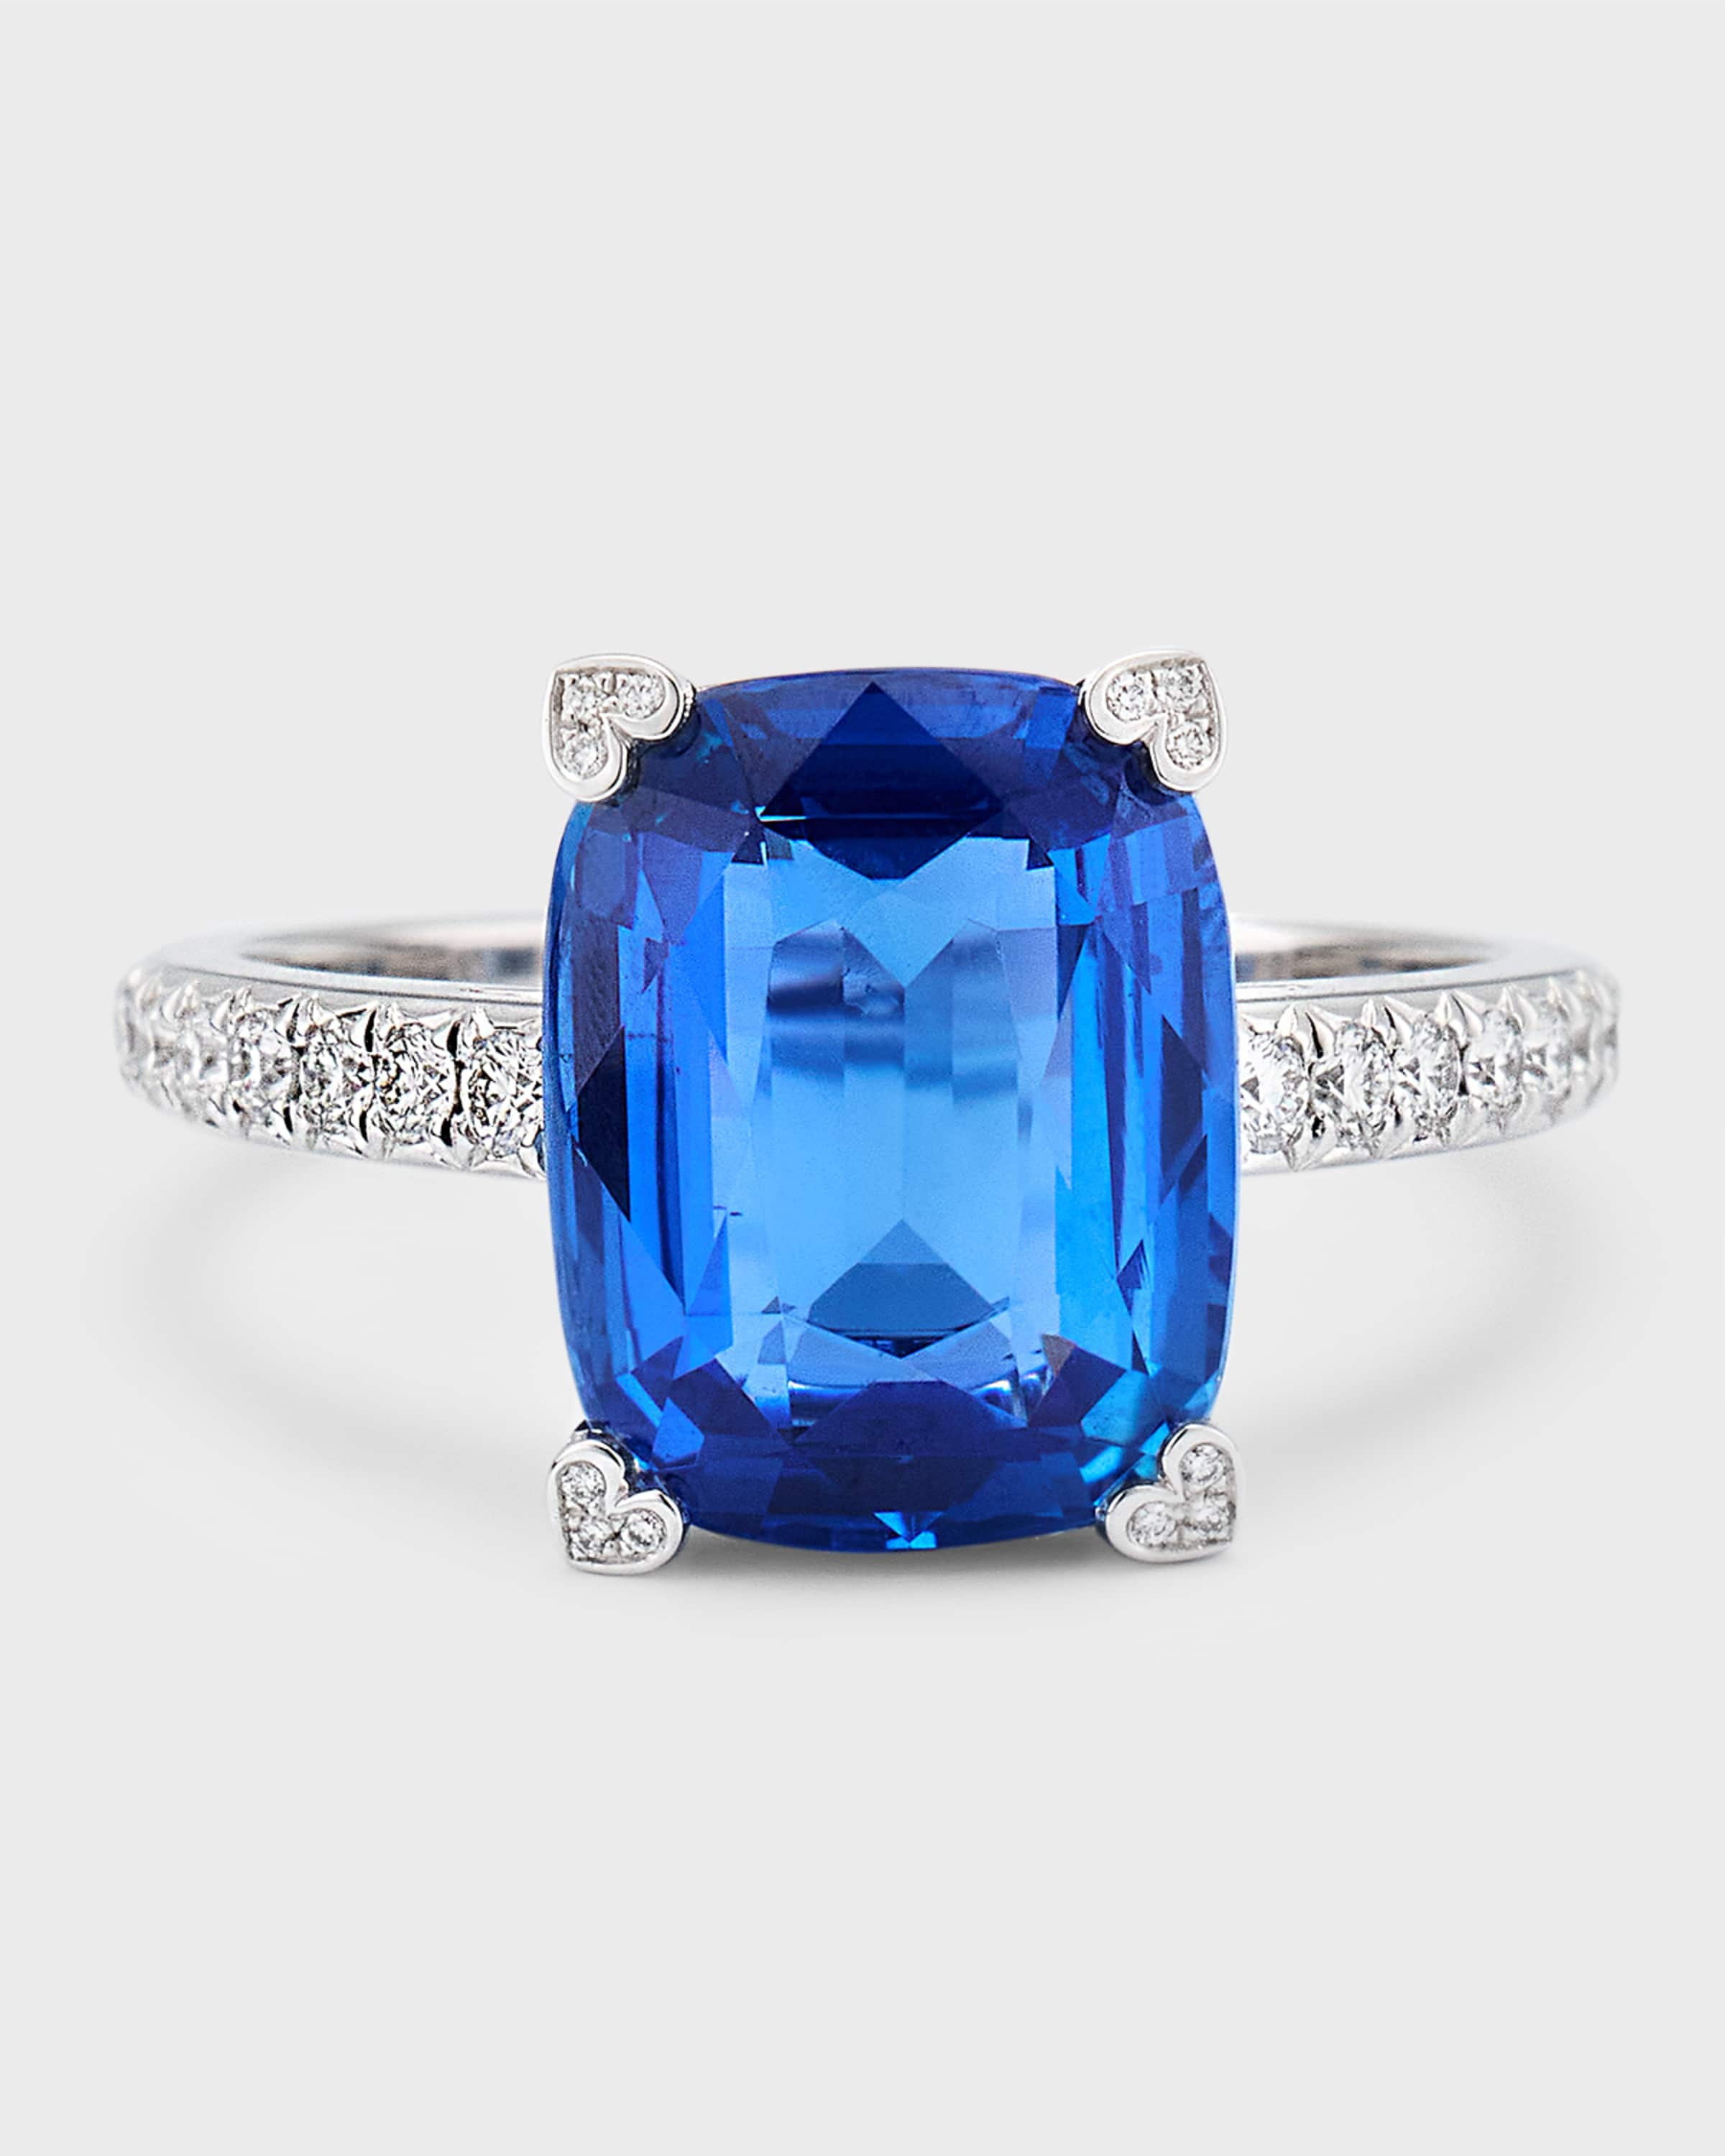 High Jewelry 18K White Gold One-of-a-Kind Blue Sapphire Solitaire Ring - 1